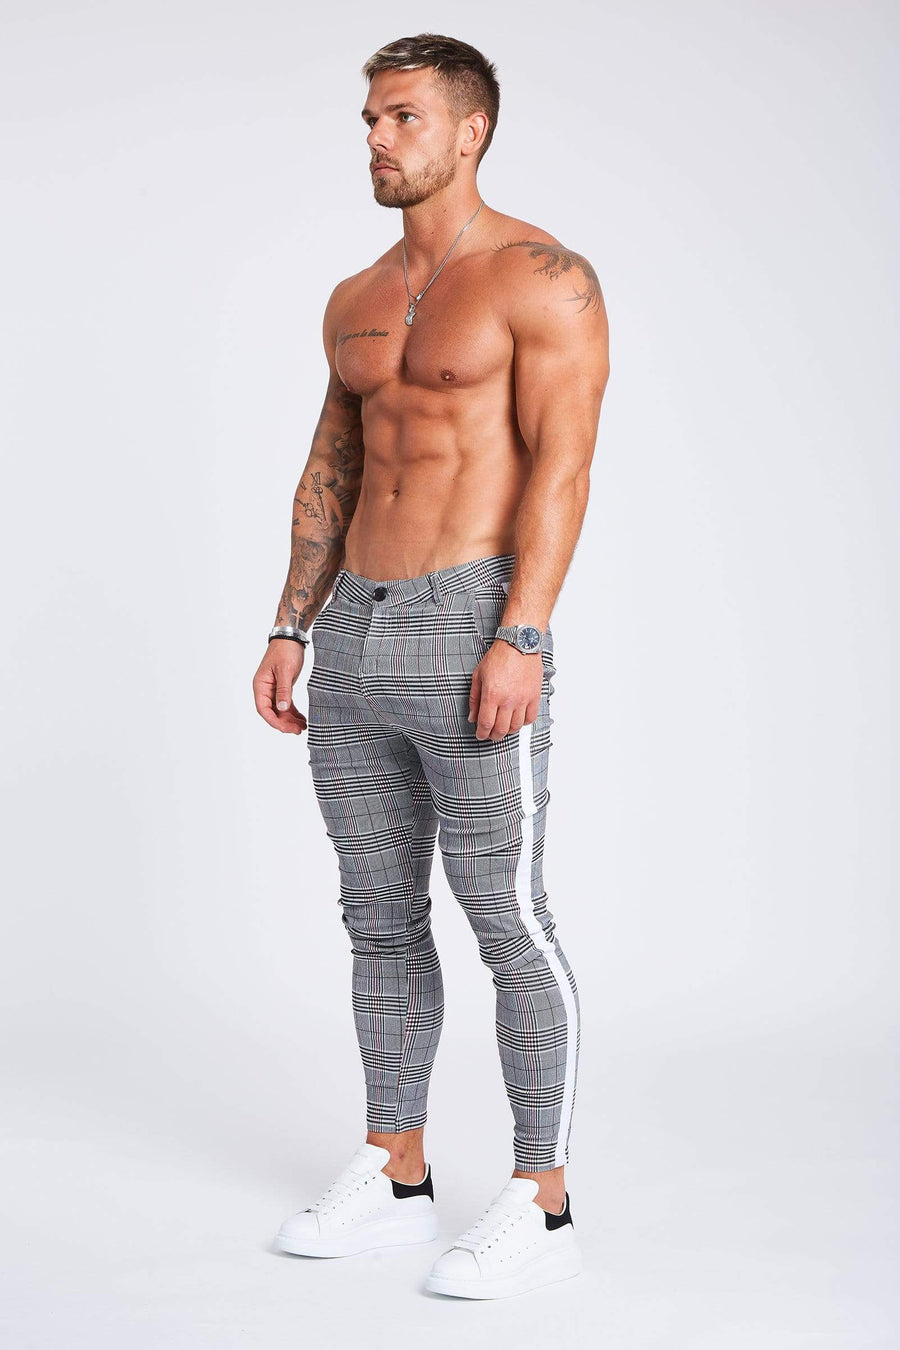 Legend London Trousers Spray on Trousers in Grey check with side stripe